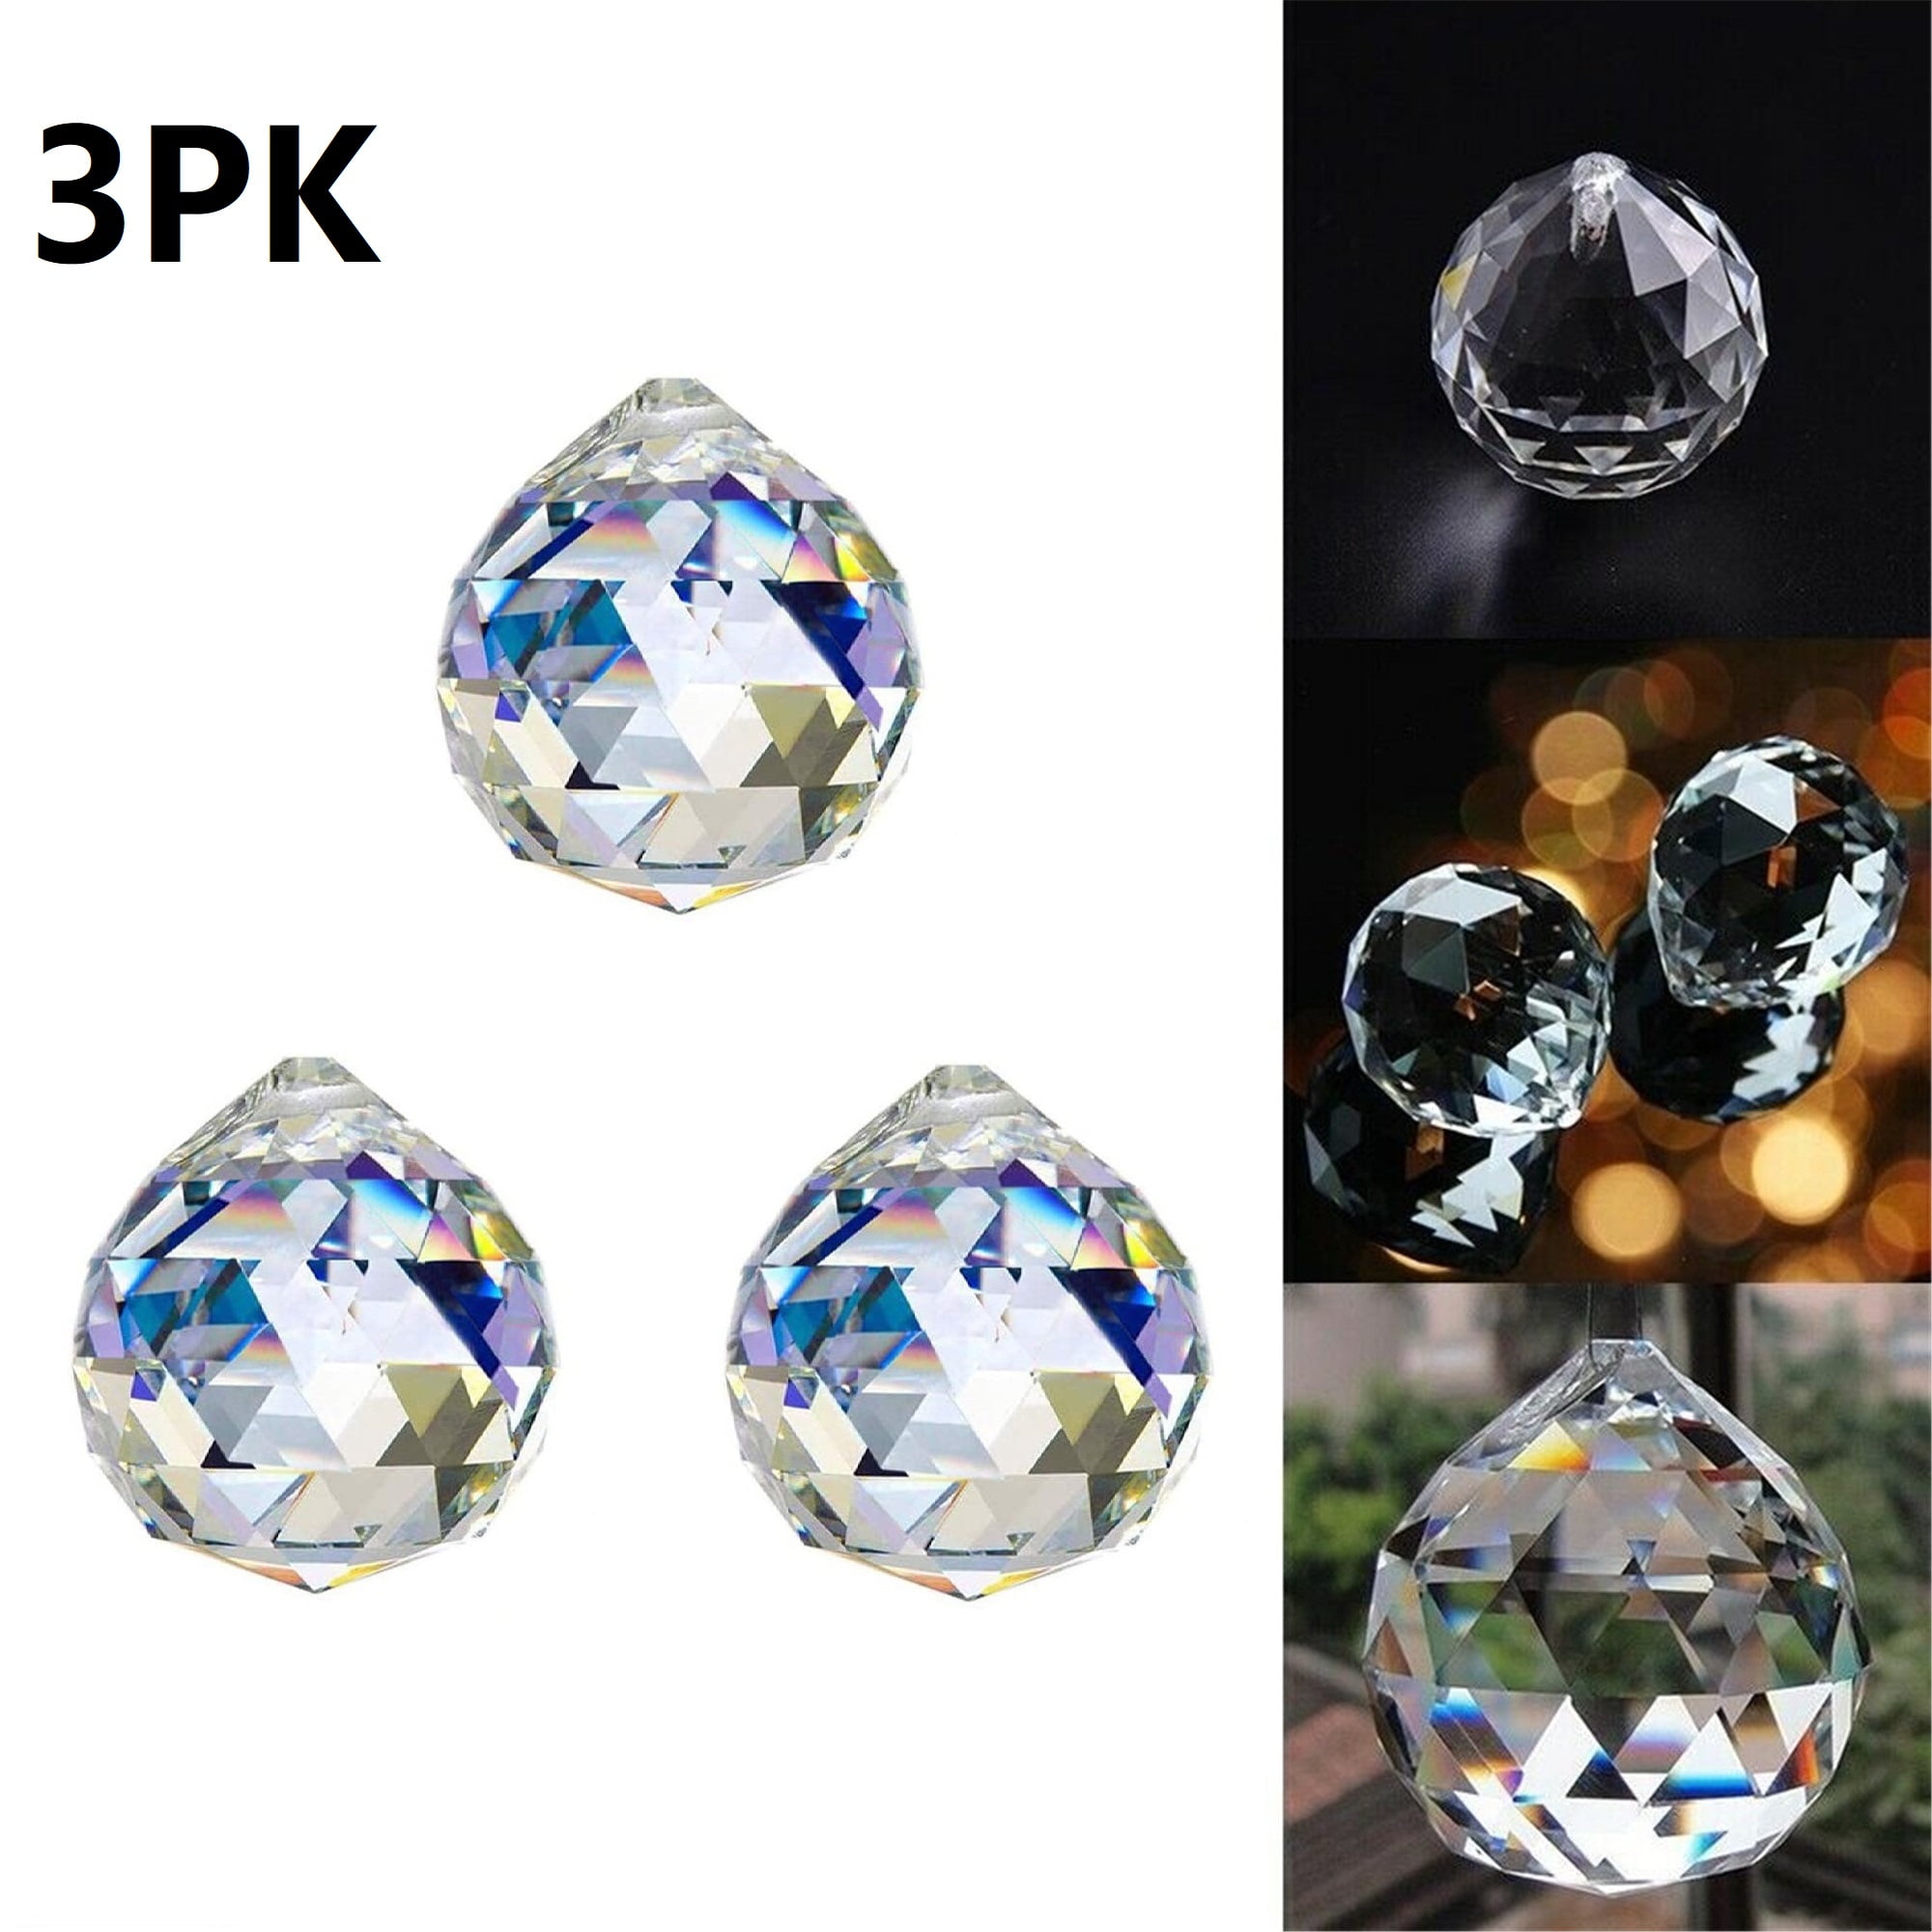 Details about     Crystal Ball Prisms Feng Shui Home Window Pendant Rainbow Maker 